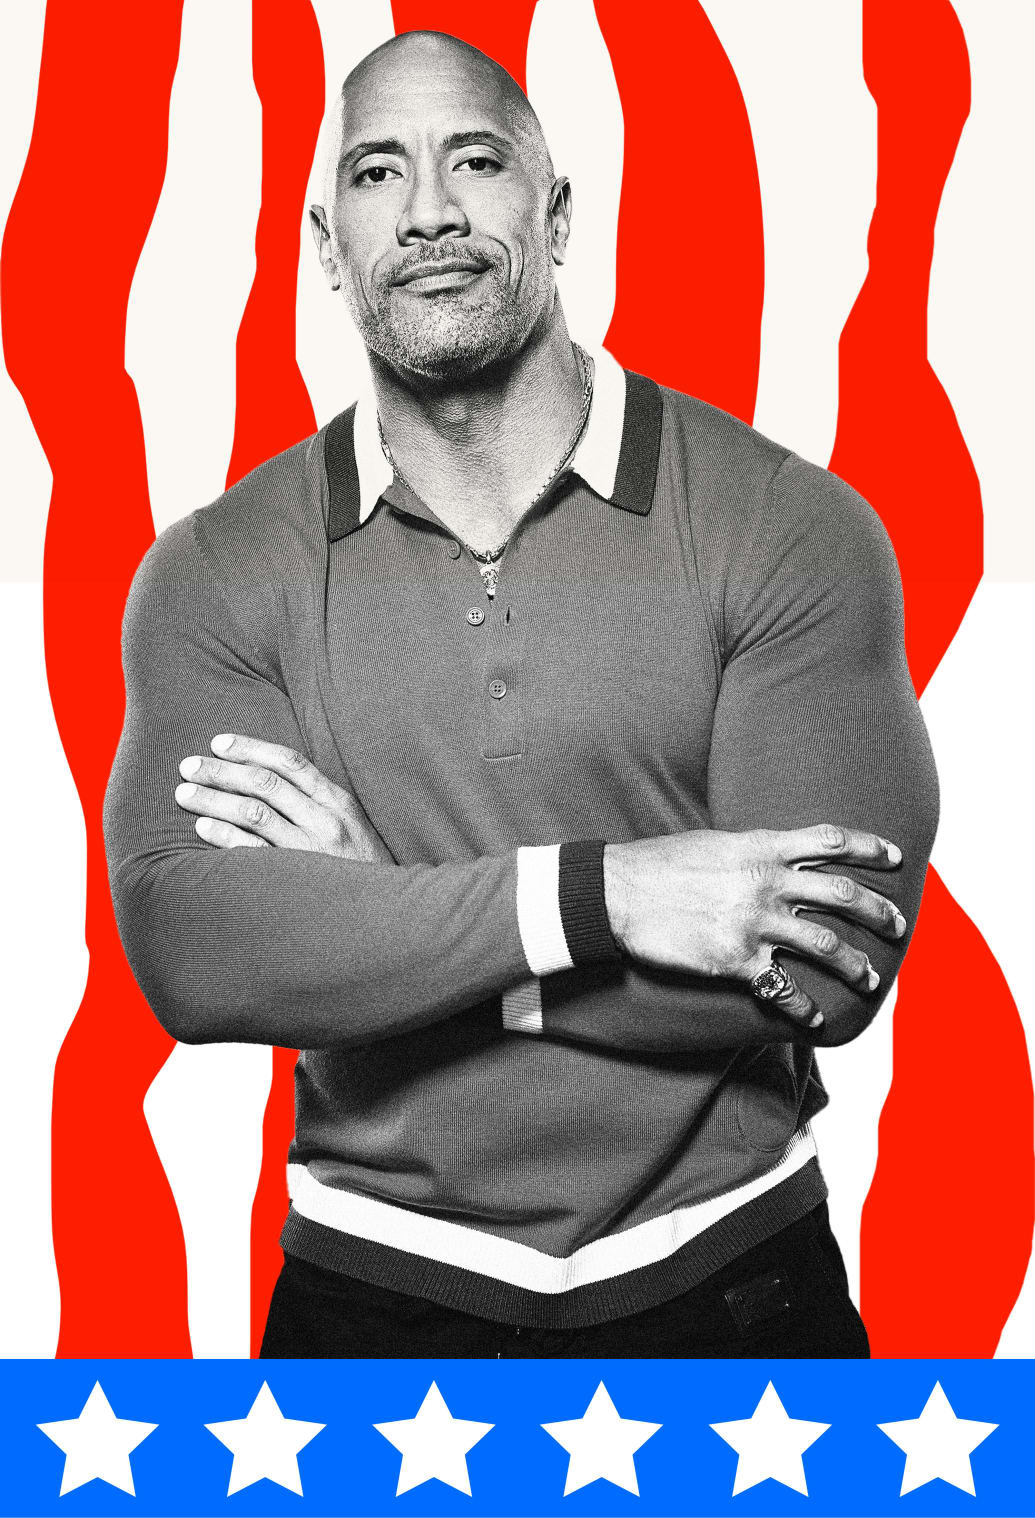 Photo illustration of Dwayne "The Rock" Johnson with an American flag motif